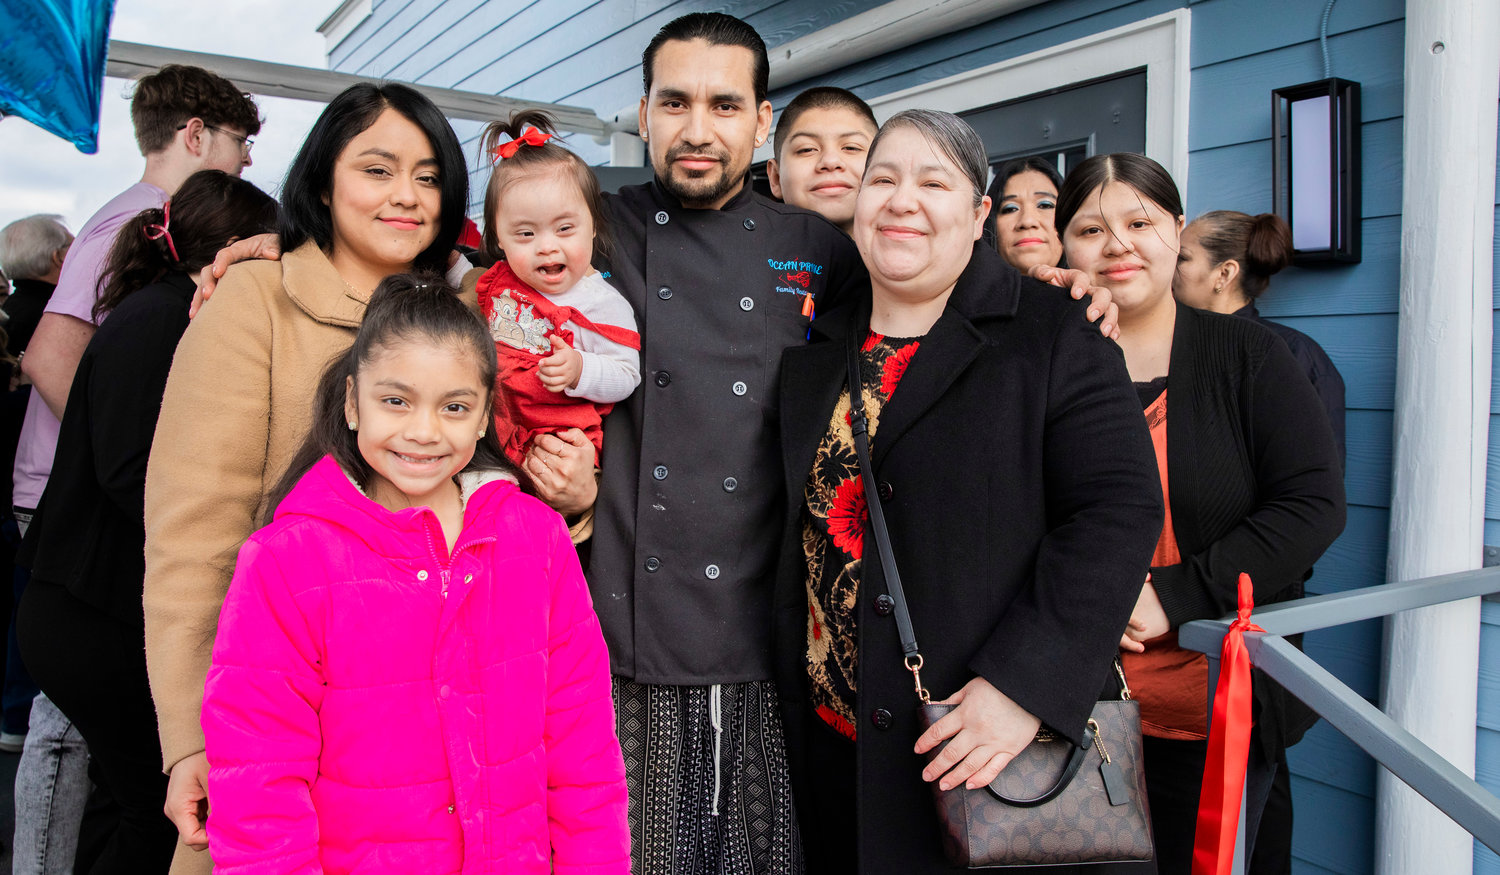 Chef Eyner "Rene" Cardona poses for a photo with family during a grand opening ceremony Monday morning outside Ocean Prime Family Restaurant in Chehalis.